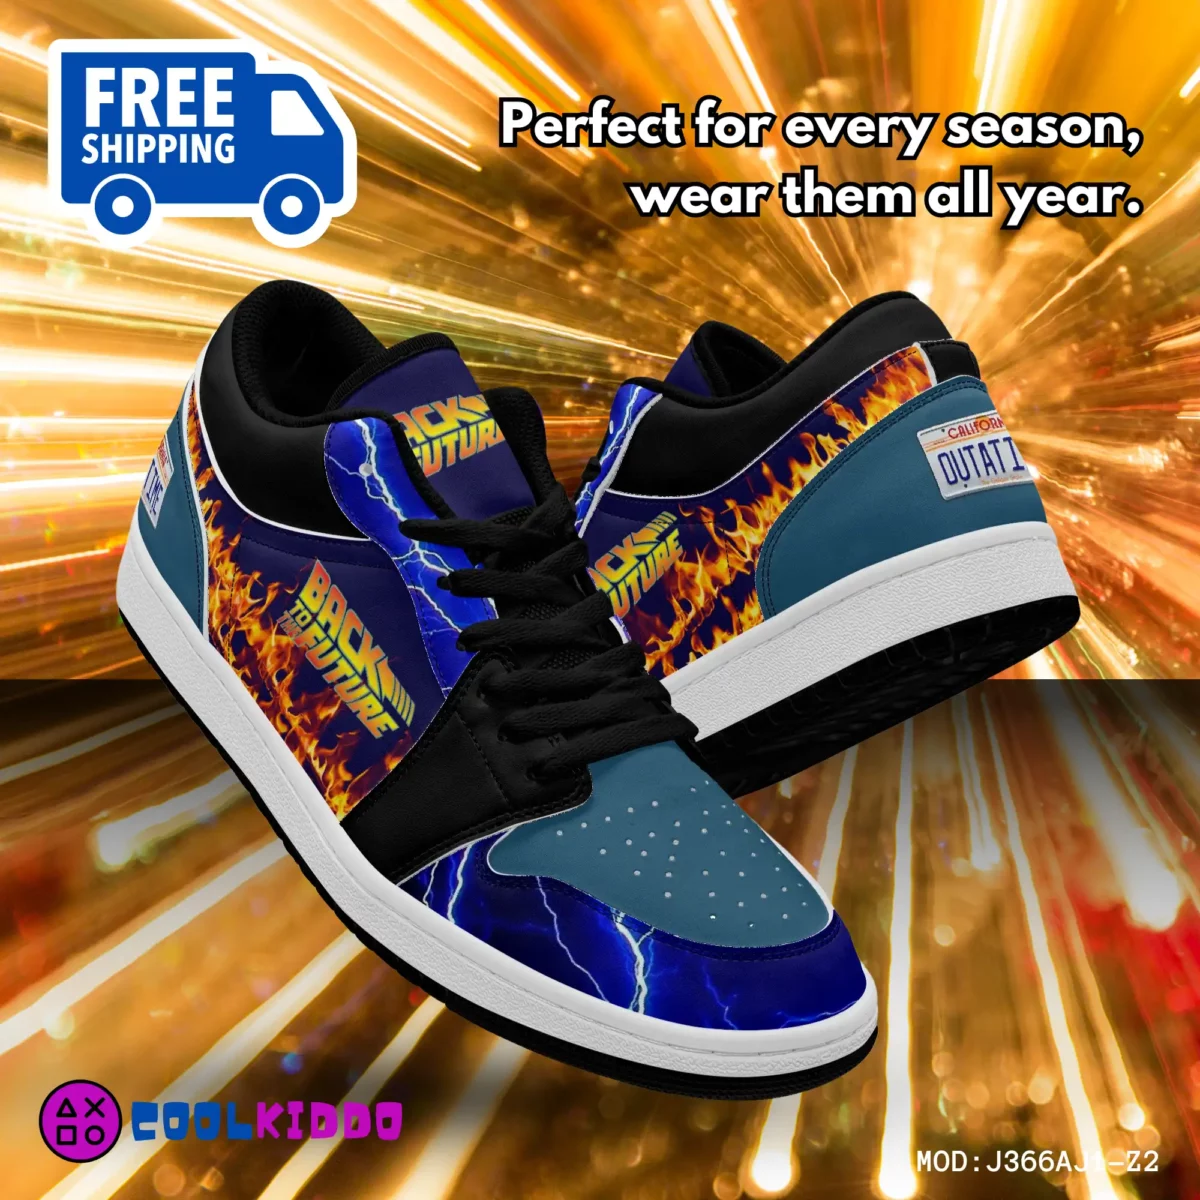 Back to the Future Movie Inspired Low-Top Leather Sneakers – Vintage Print Shoes for Youth/Adults Cool Kiddo 20